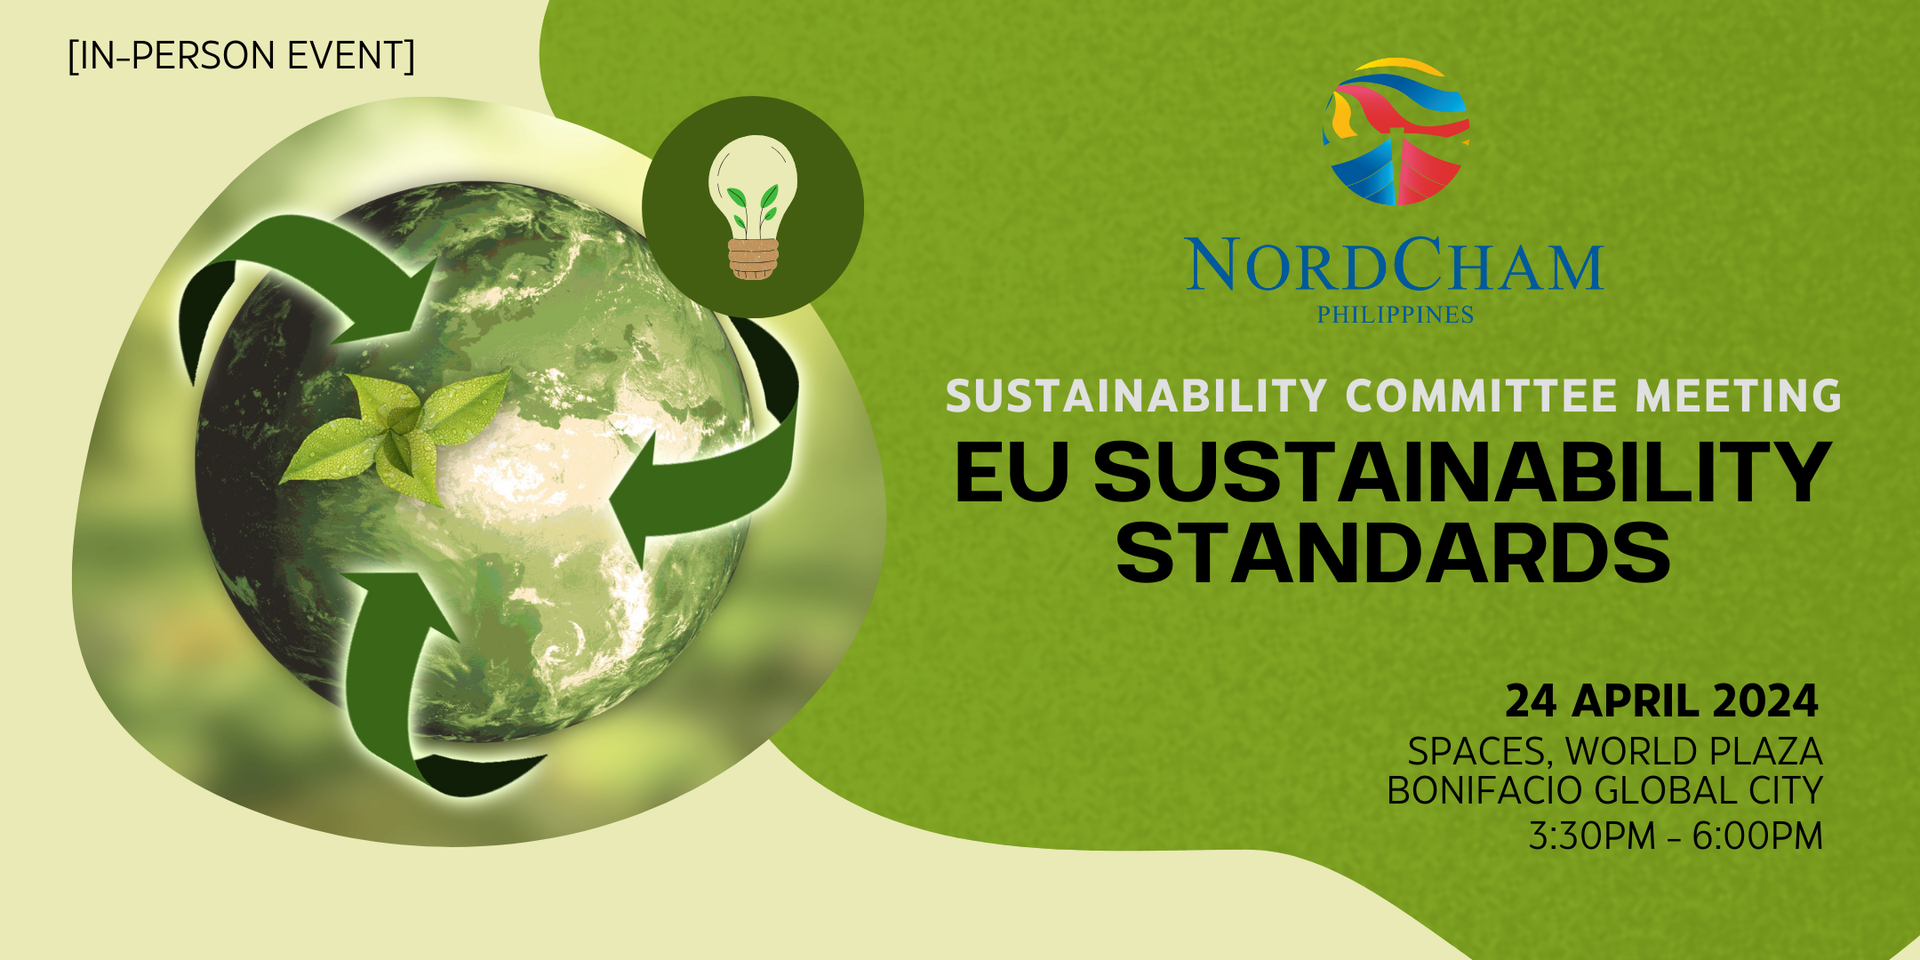 thumbnails SUSTAINABILITY COMMITTEE MEETING: EU SUSTAINABILITY STANDARDS | 24 APRIL 2024 | SPACES, WORLD PLAZA, BGC